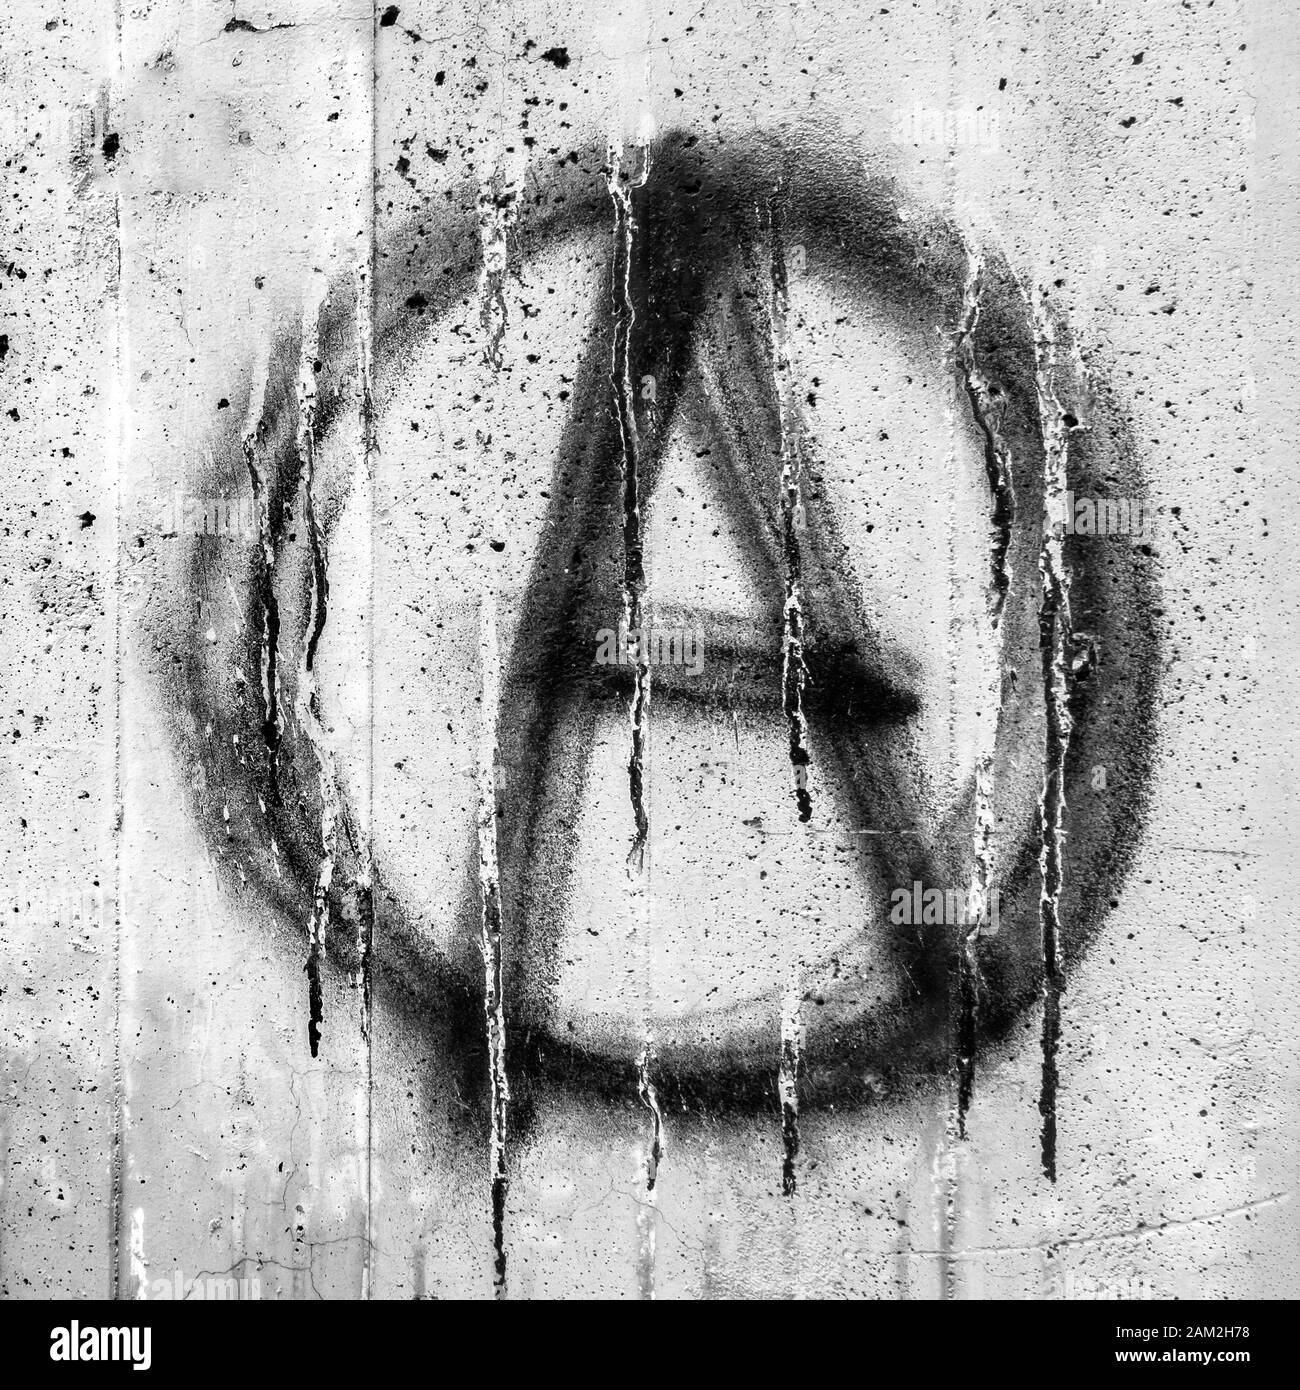 Symbol of Anarchy painted on a grungy concrete wall. Ideal for concepts and backgrounds. Stock Photo